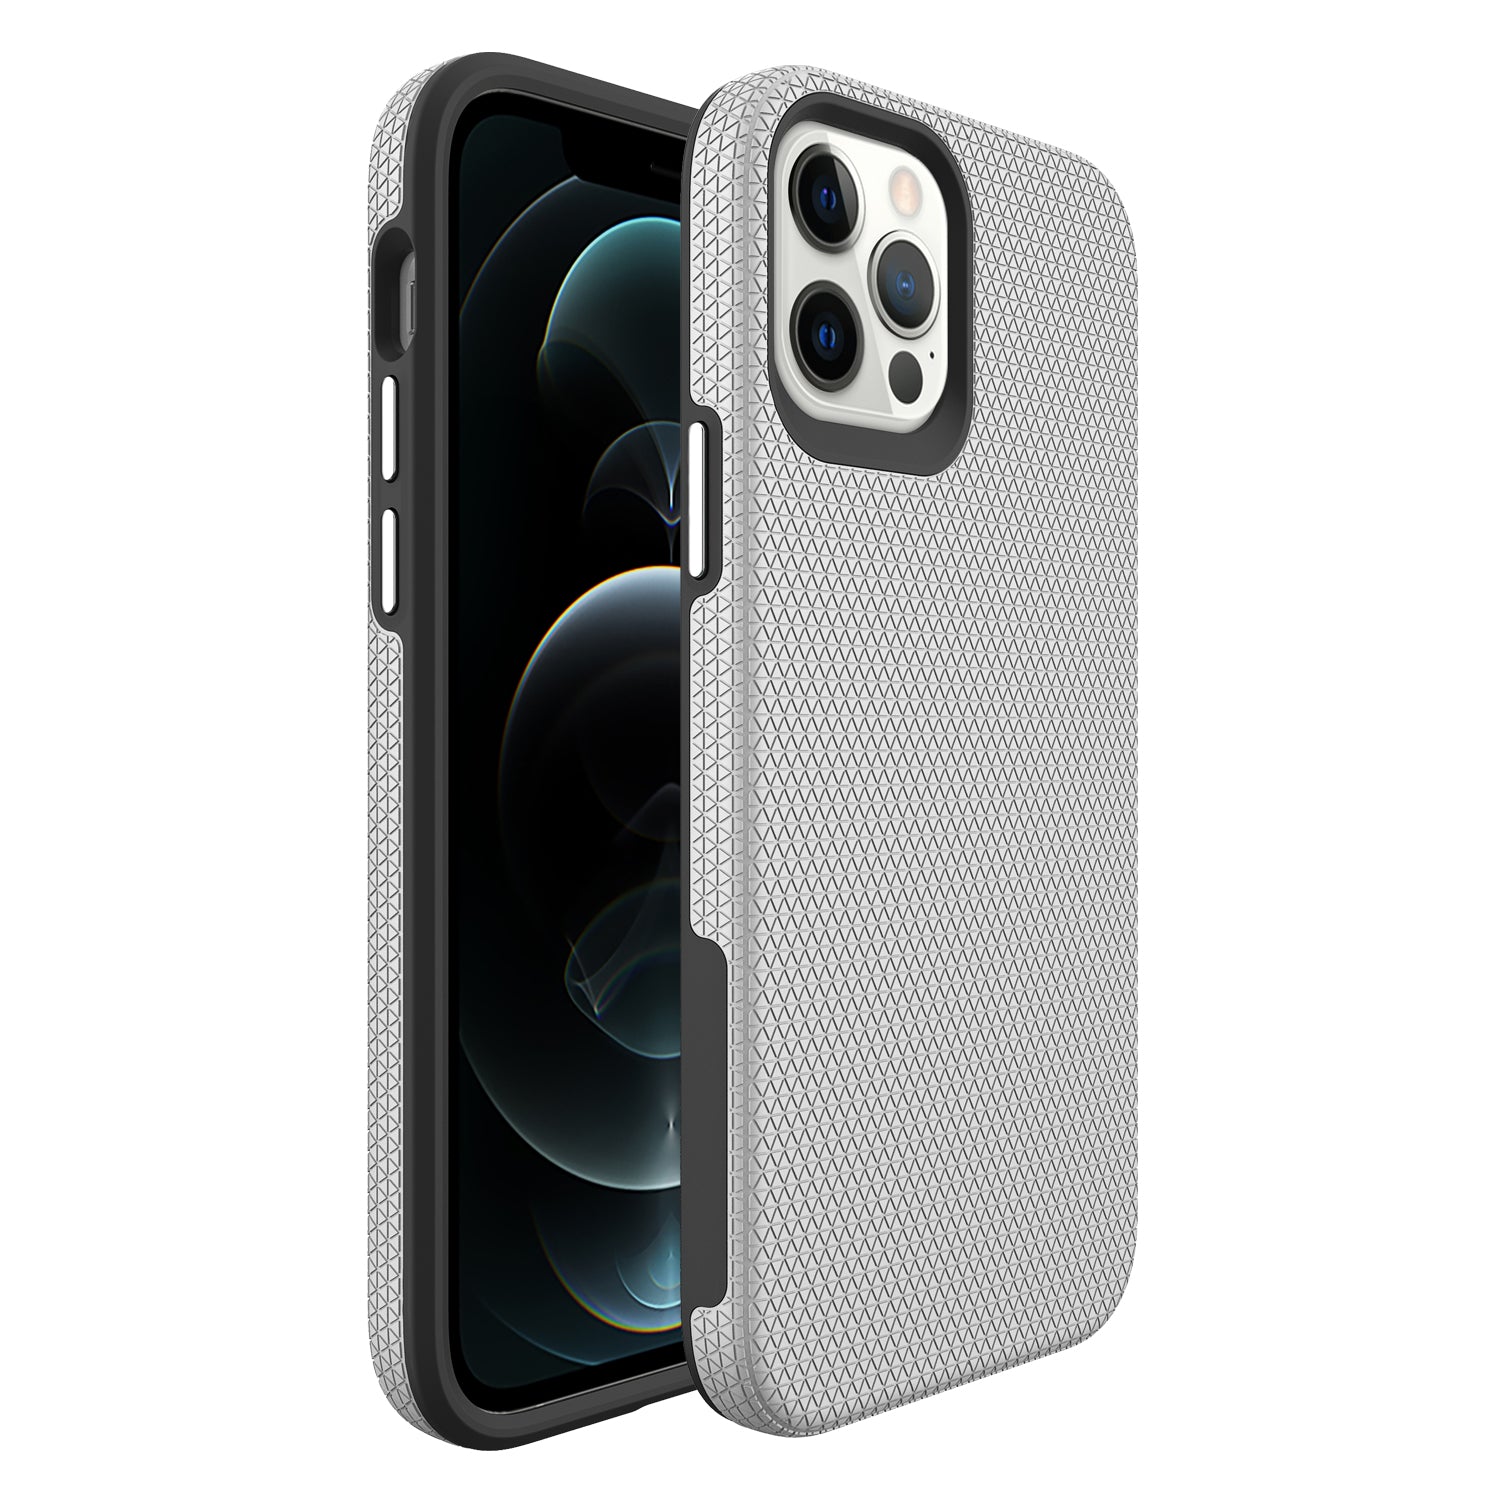 ZEOS Sphinx Dual Layer Case for iPhone 12 Pro